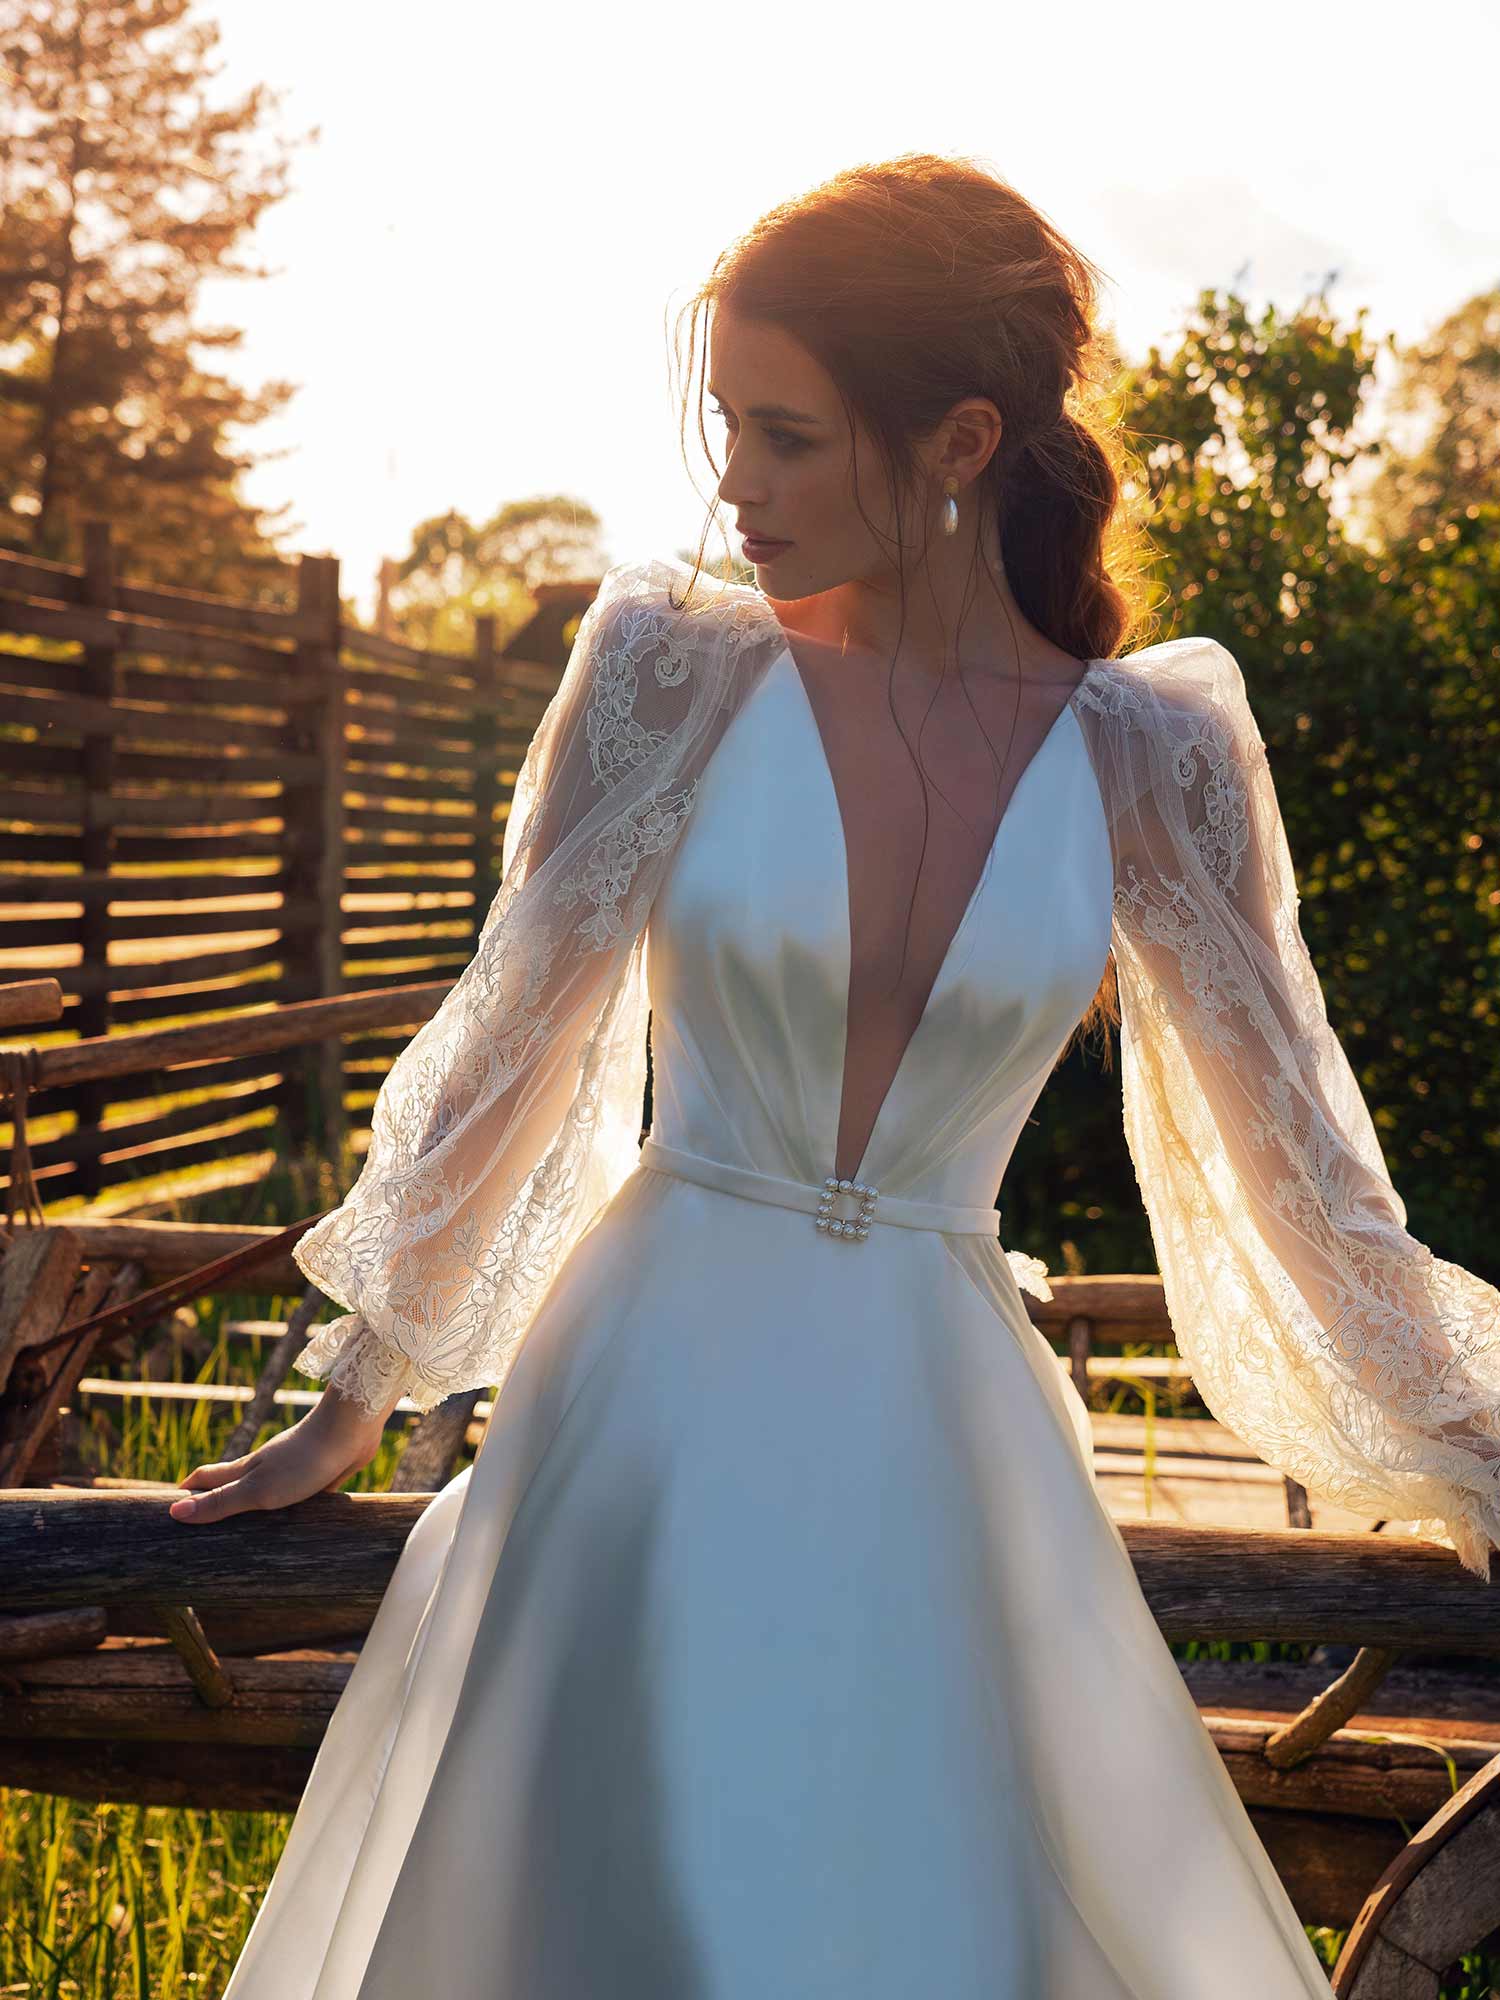 A-line wedding dress with lace bishop sleeves